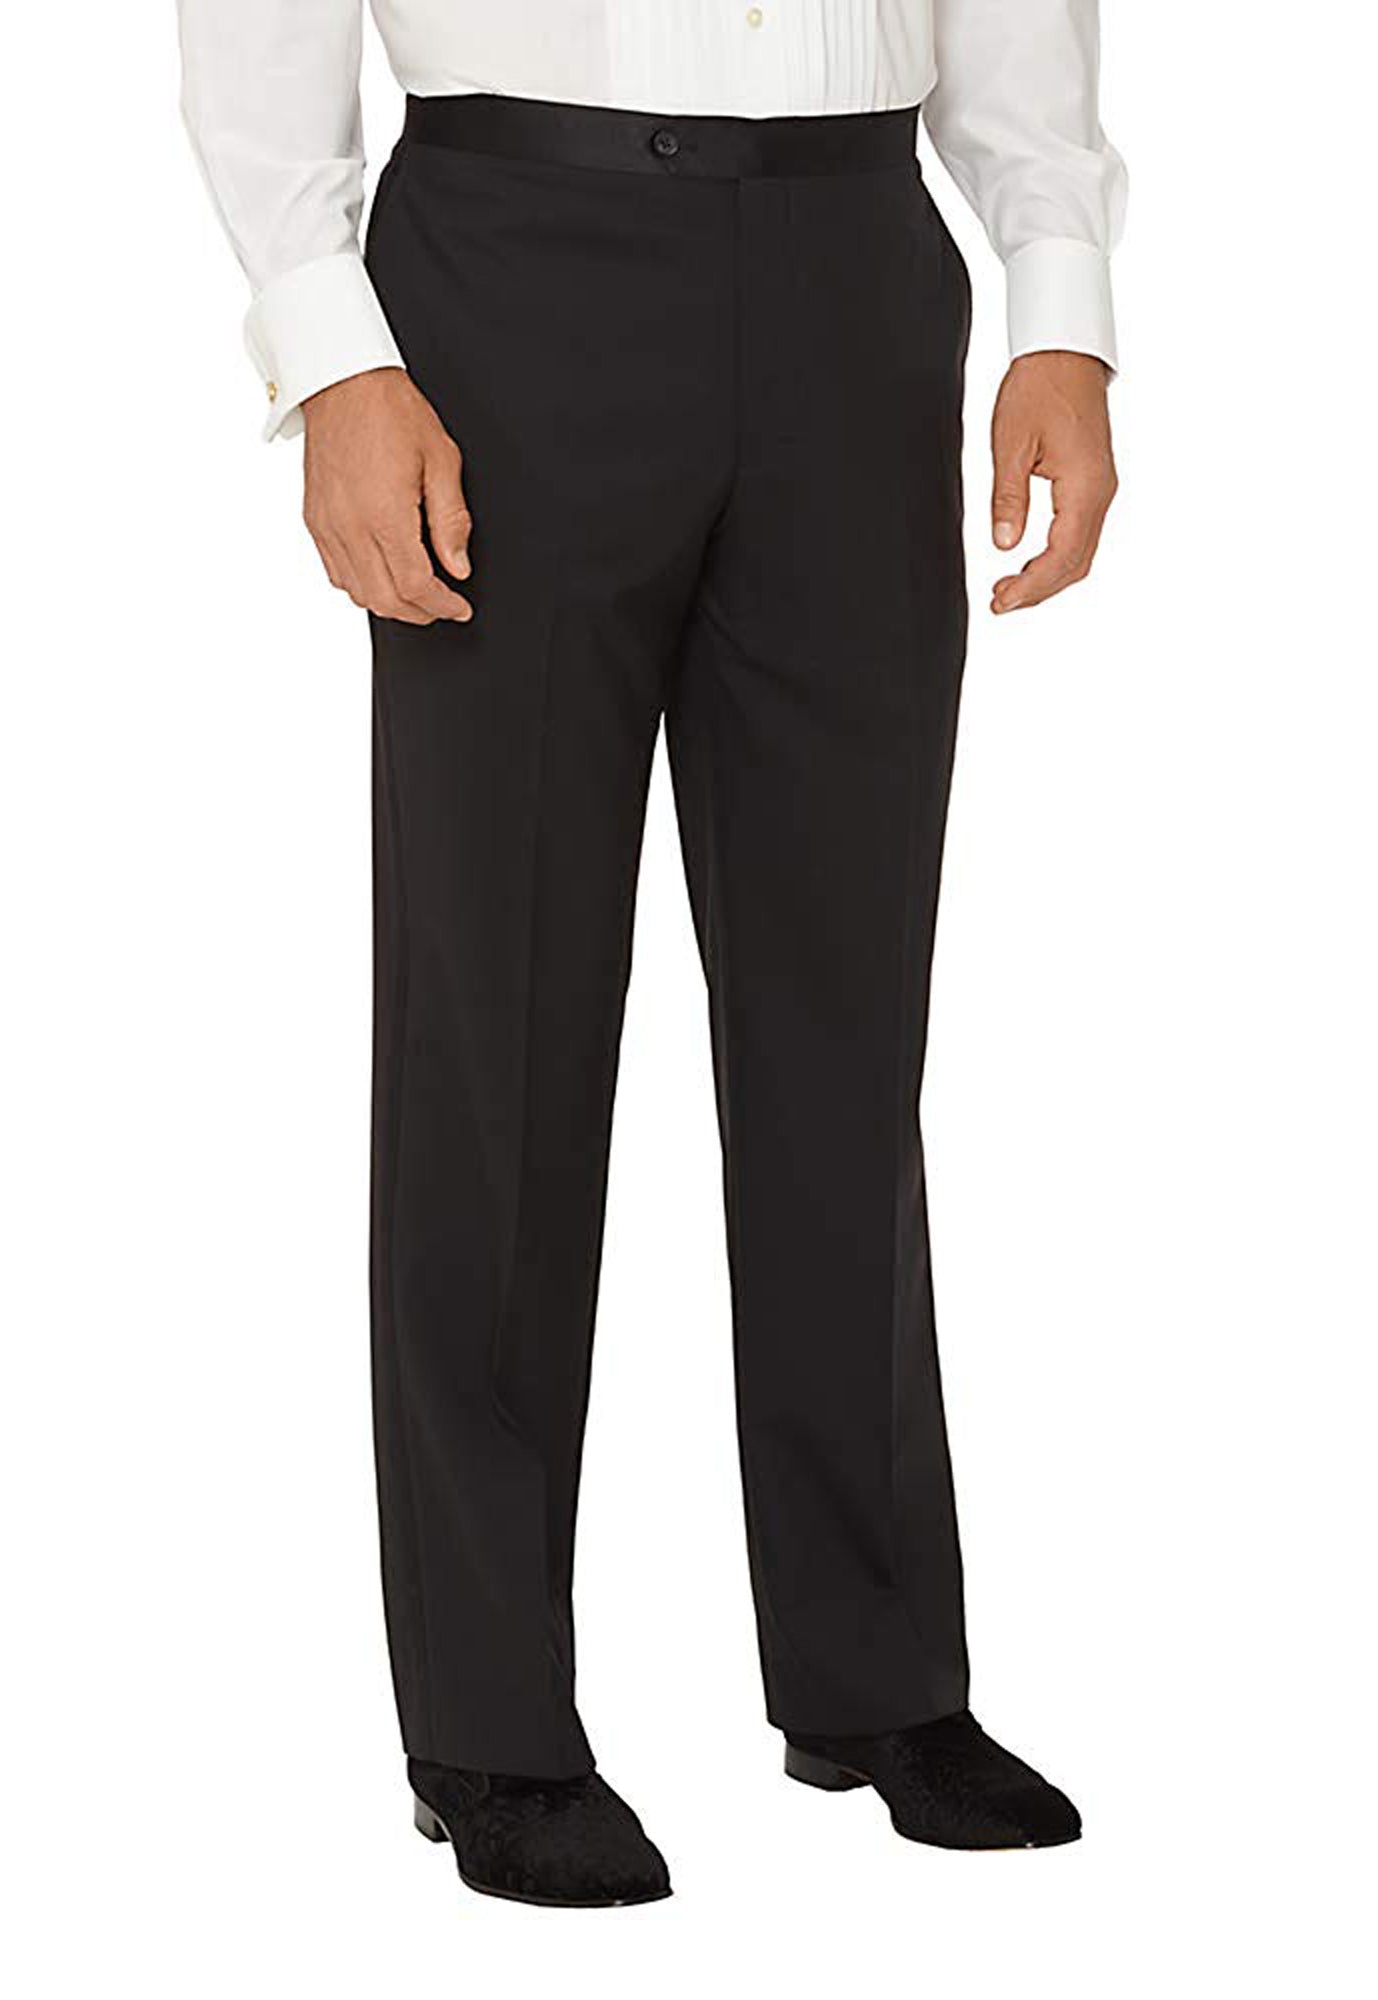 Variety of Styles Colors And Sizes Mens Satin Pants For Men